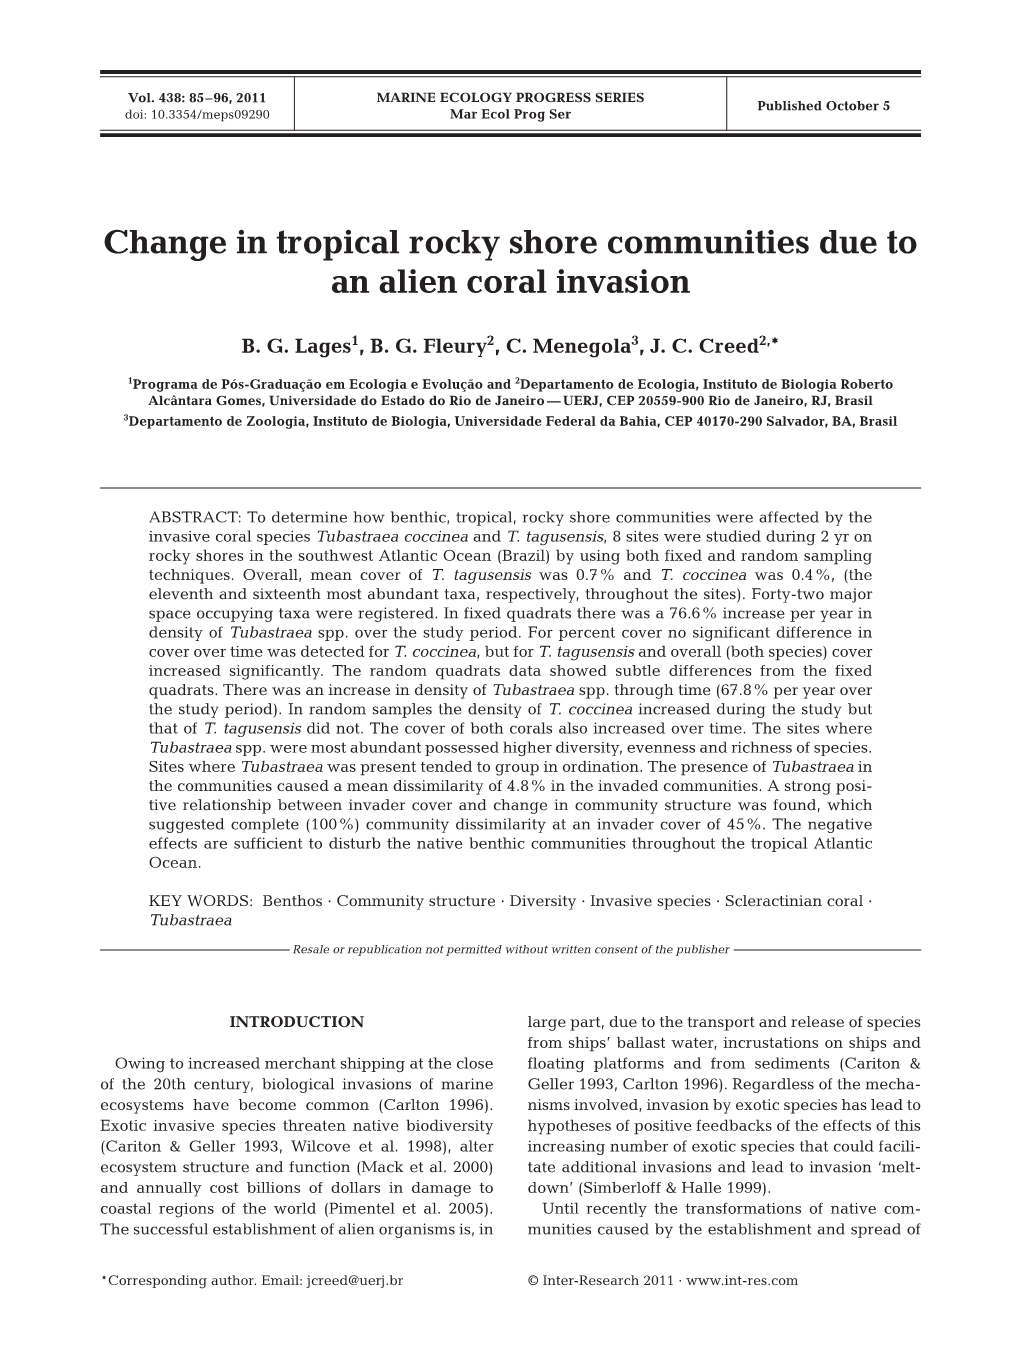 Change in Tropical Rocky Shore Communities Due to an Alien Coral Invasion